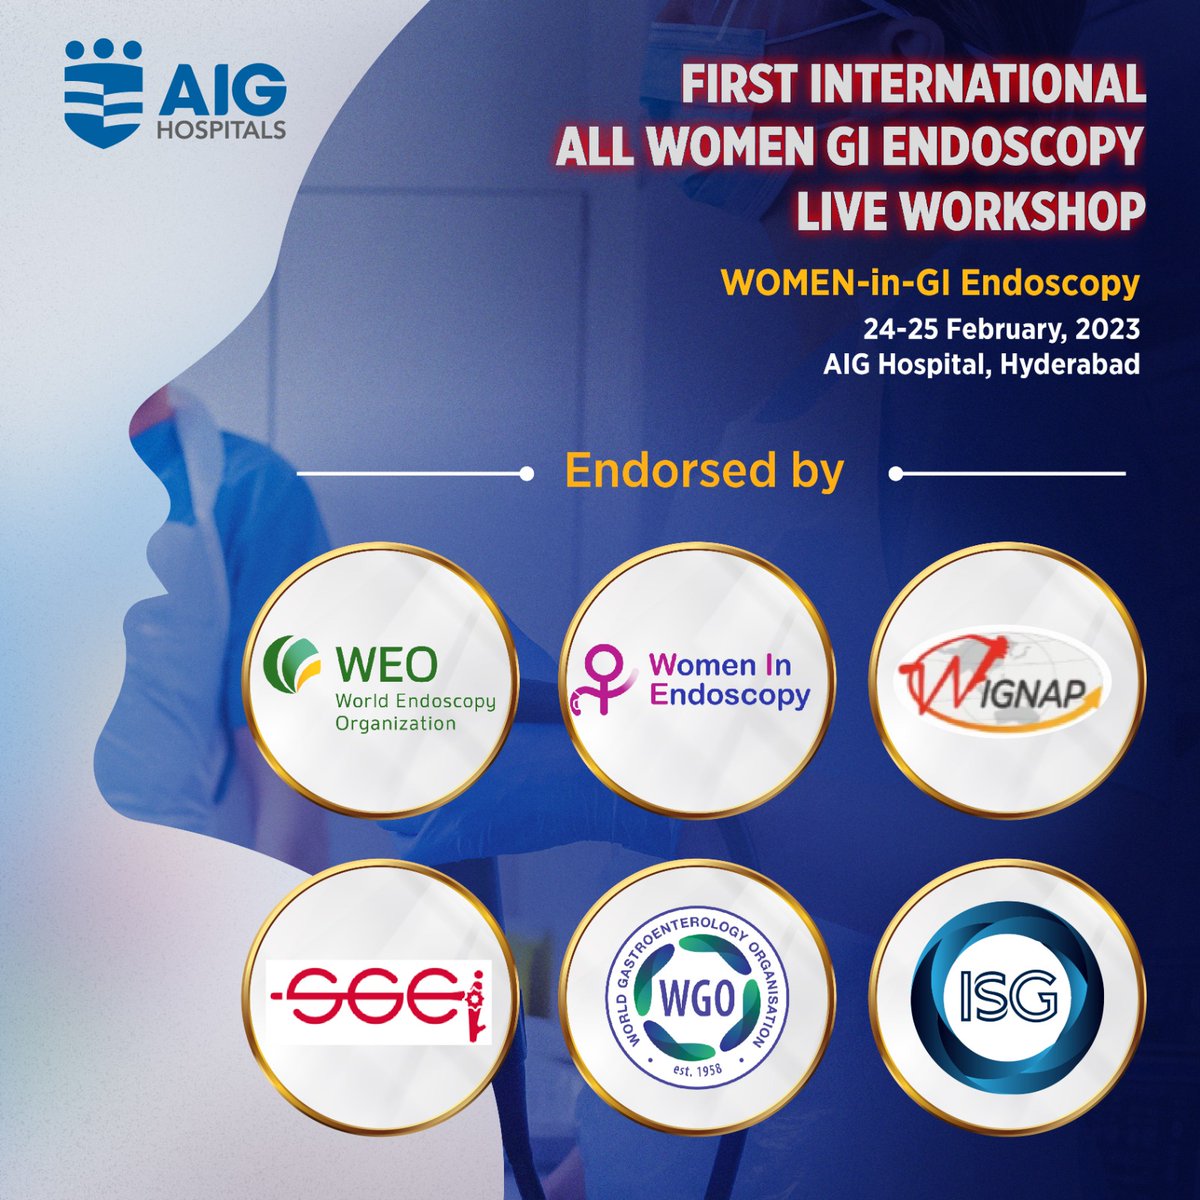 A shout out to all the amazing organisations across the world for endorsing the All Women GI Endoscopy LIVE Workshop. It's truly a collaborative effort towards an inclusive future of #GIEndoscopy.
#WEO #WIE #WIGNAP #SGEI #WGO #ISG #AIGHospitals